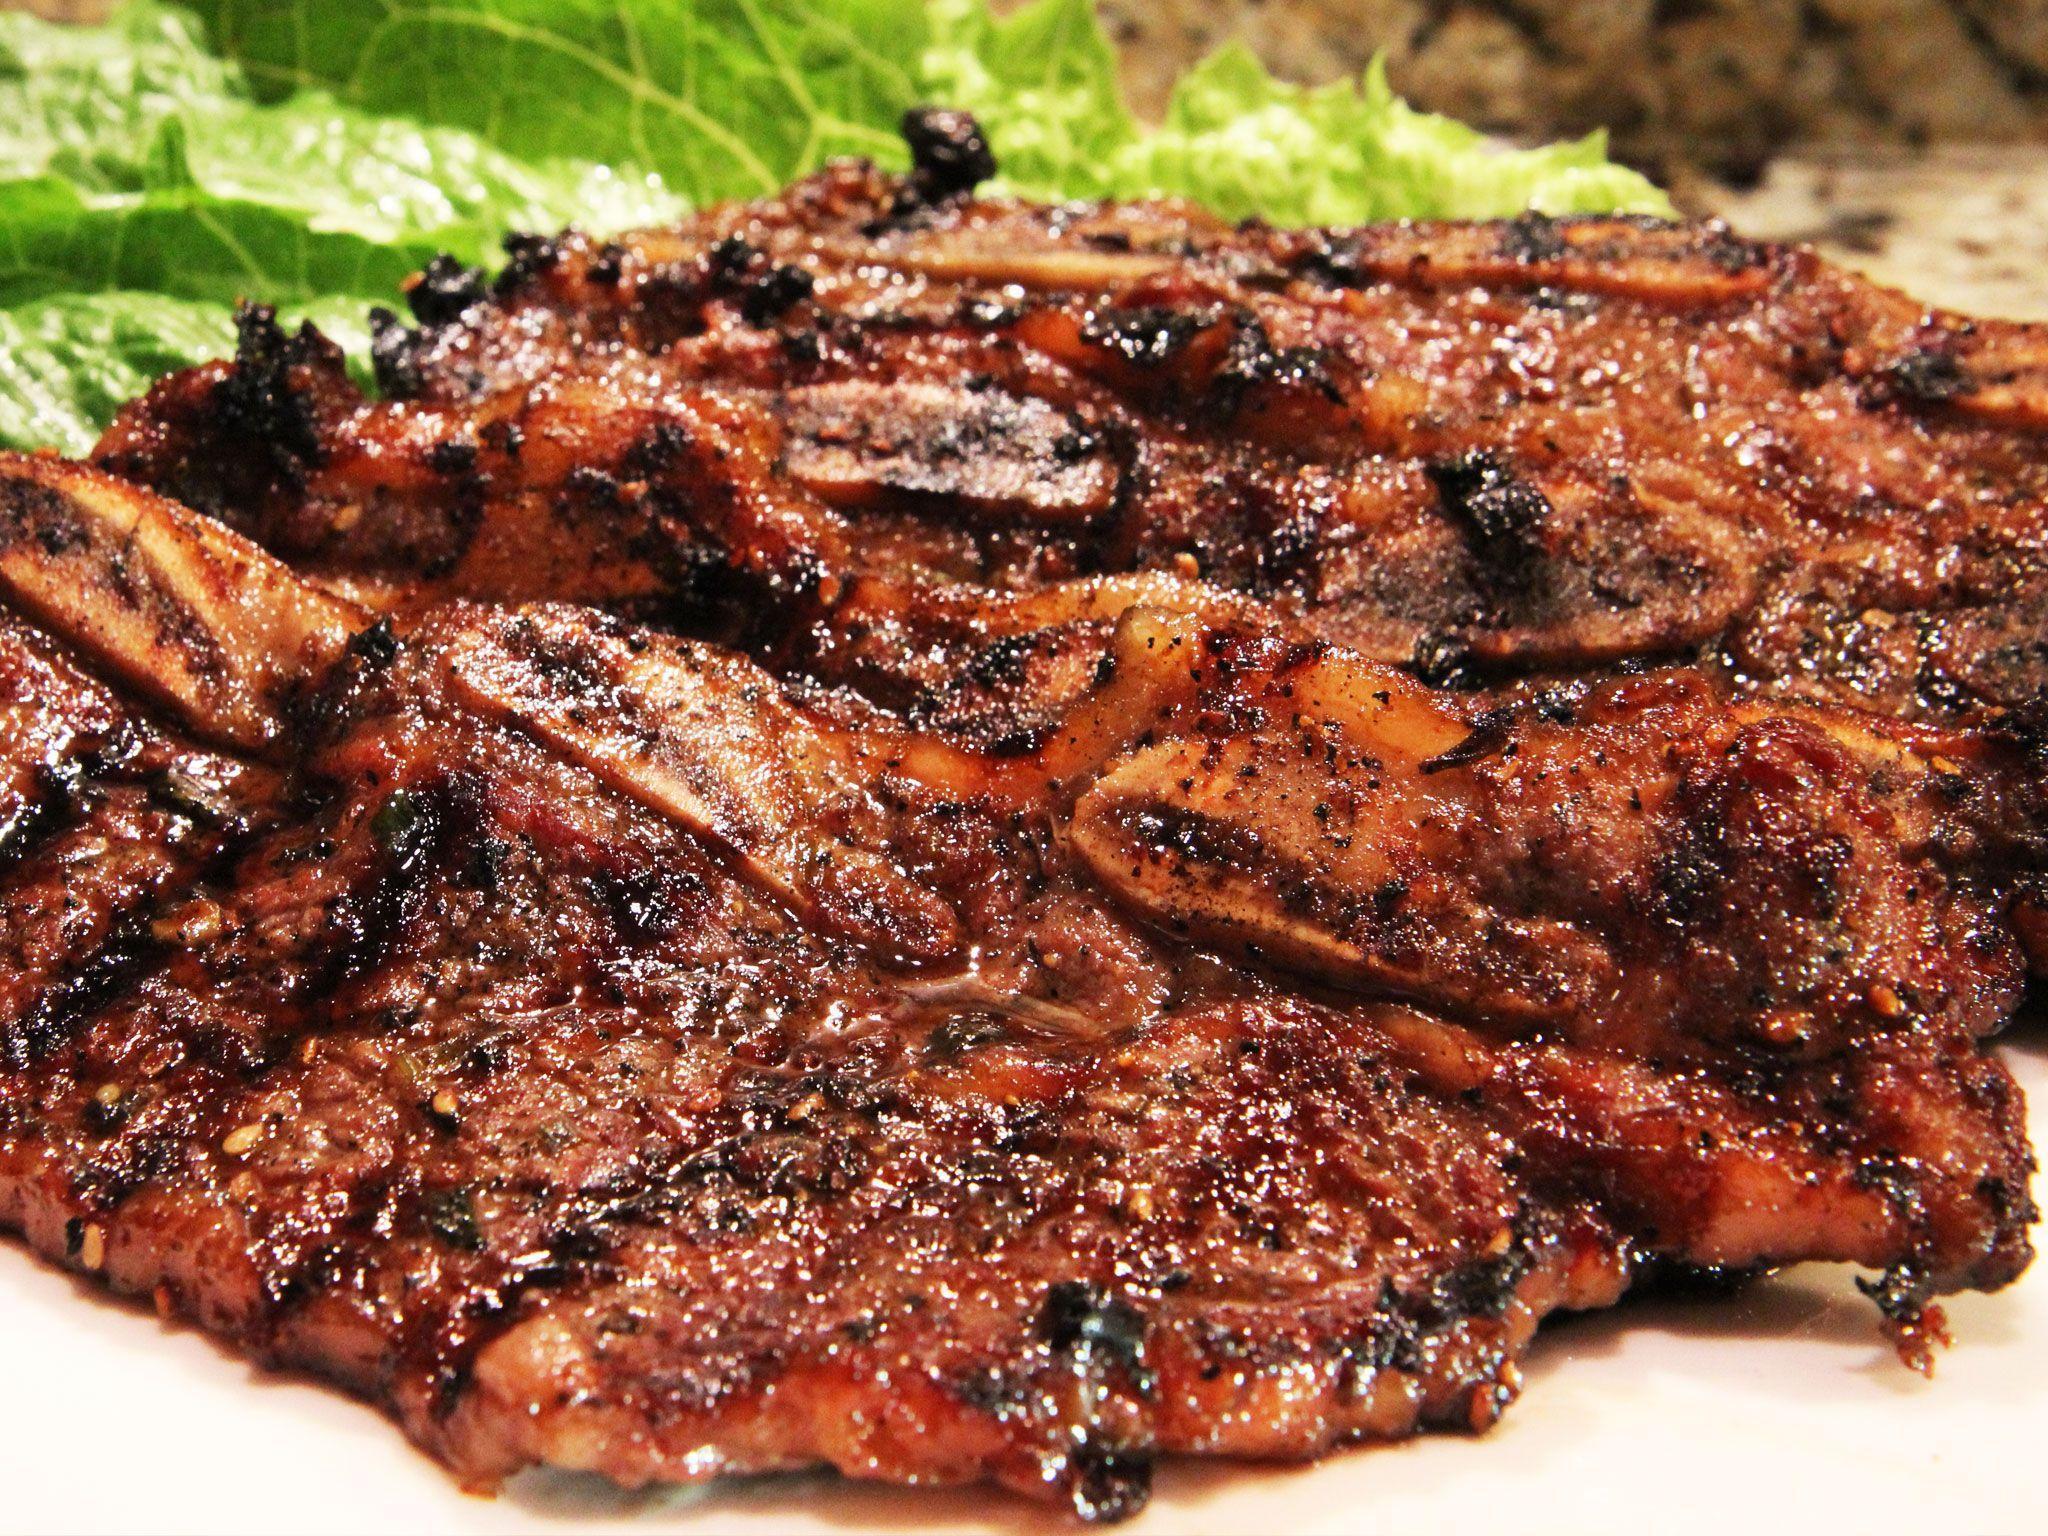 Barbecue Ribs On Grill